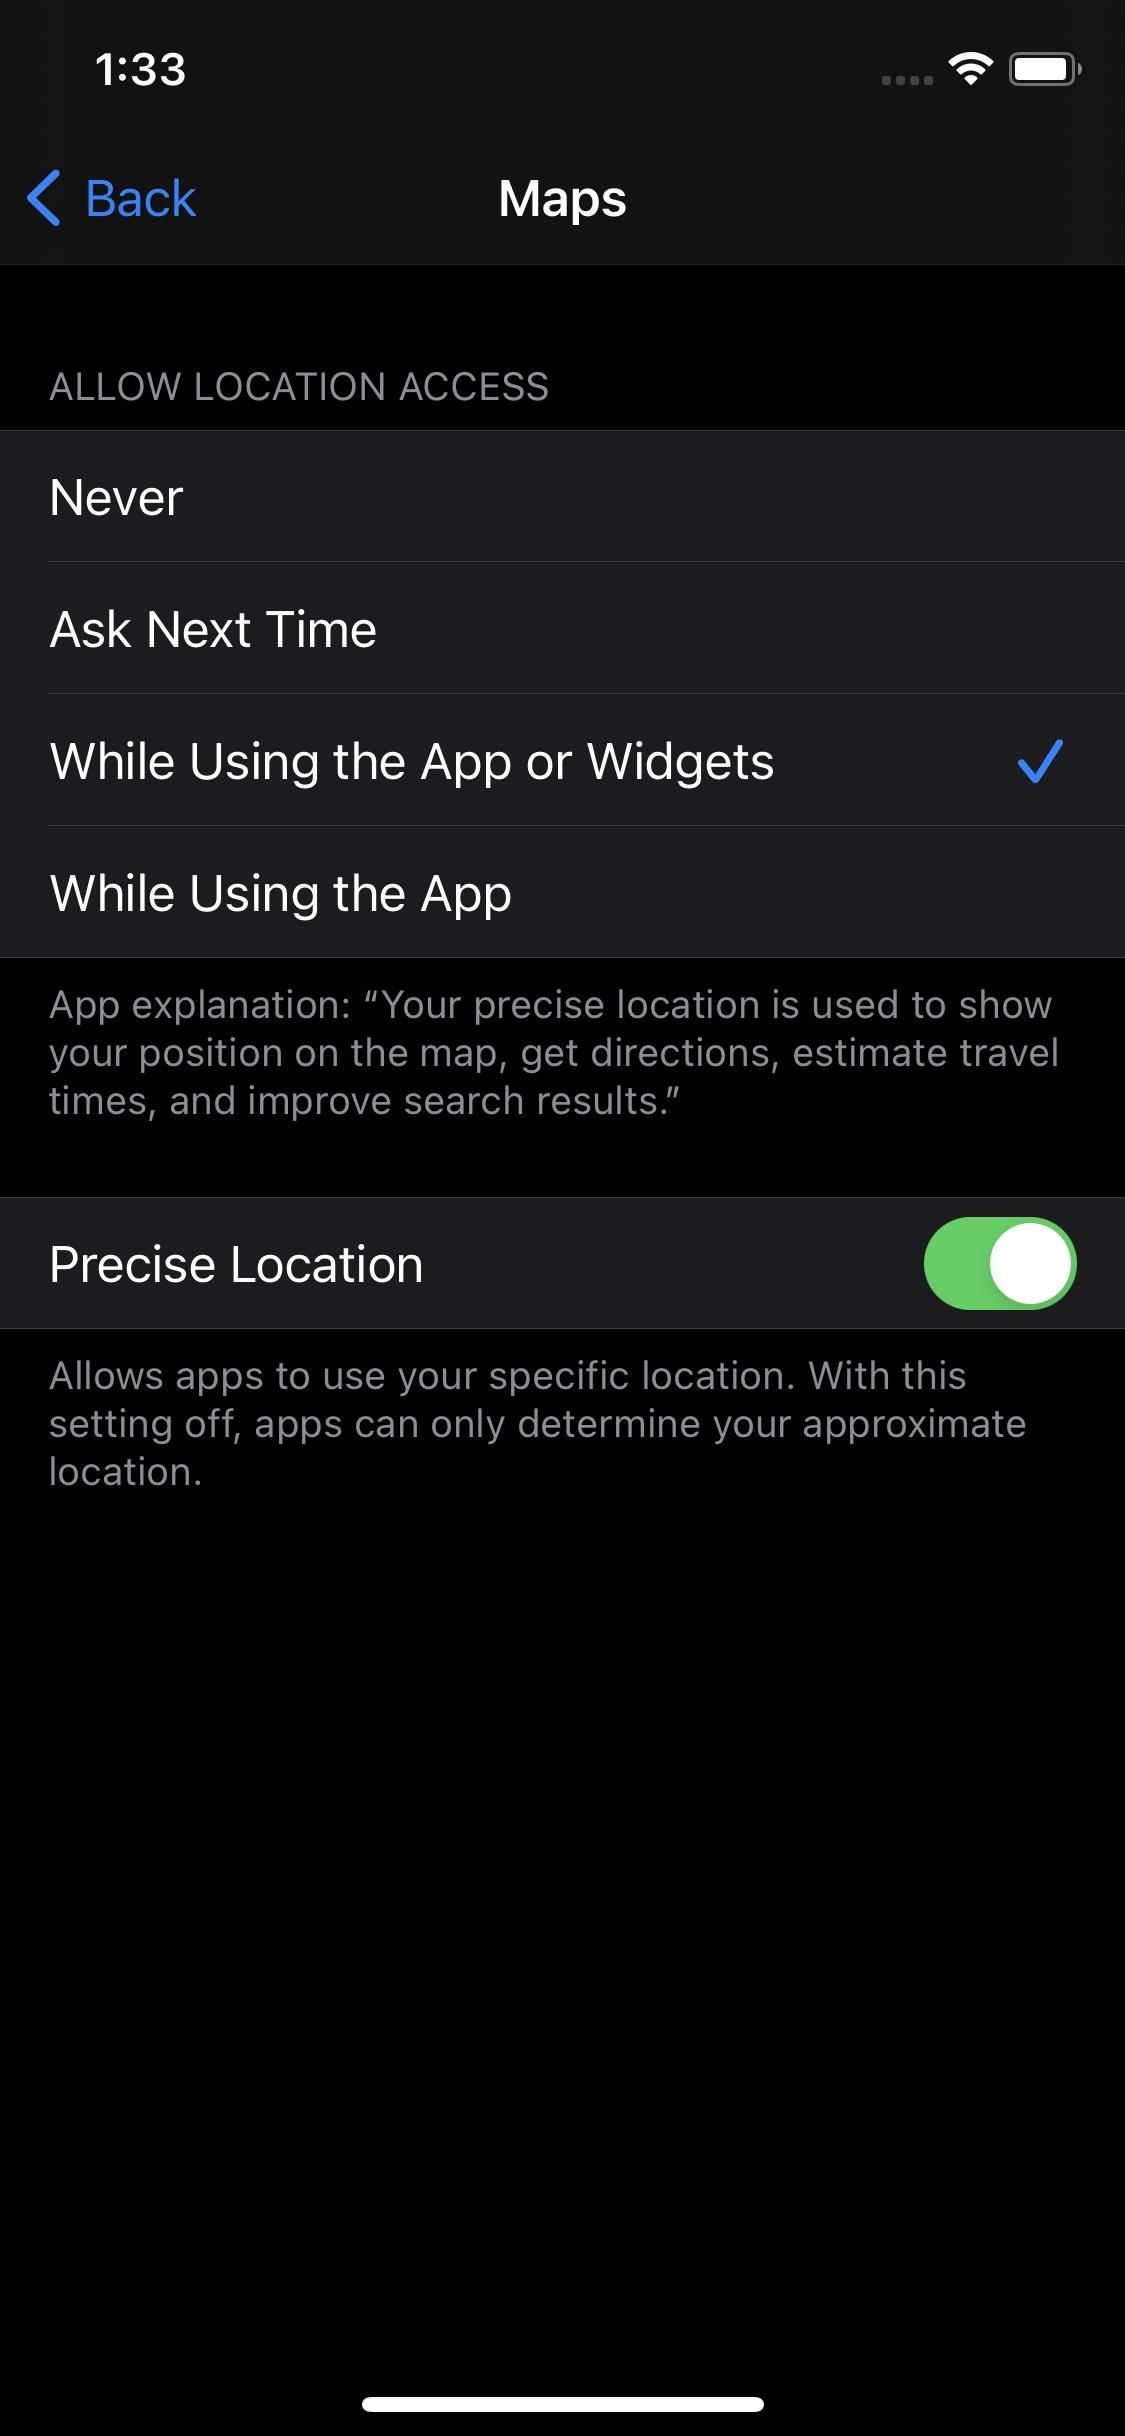 Apple Releases iOS 14 Public Beta 5 for iPhone, Includes Widget Location Settings & 'Tall' Apple News Widget Size